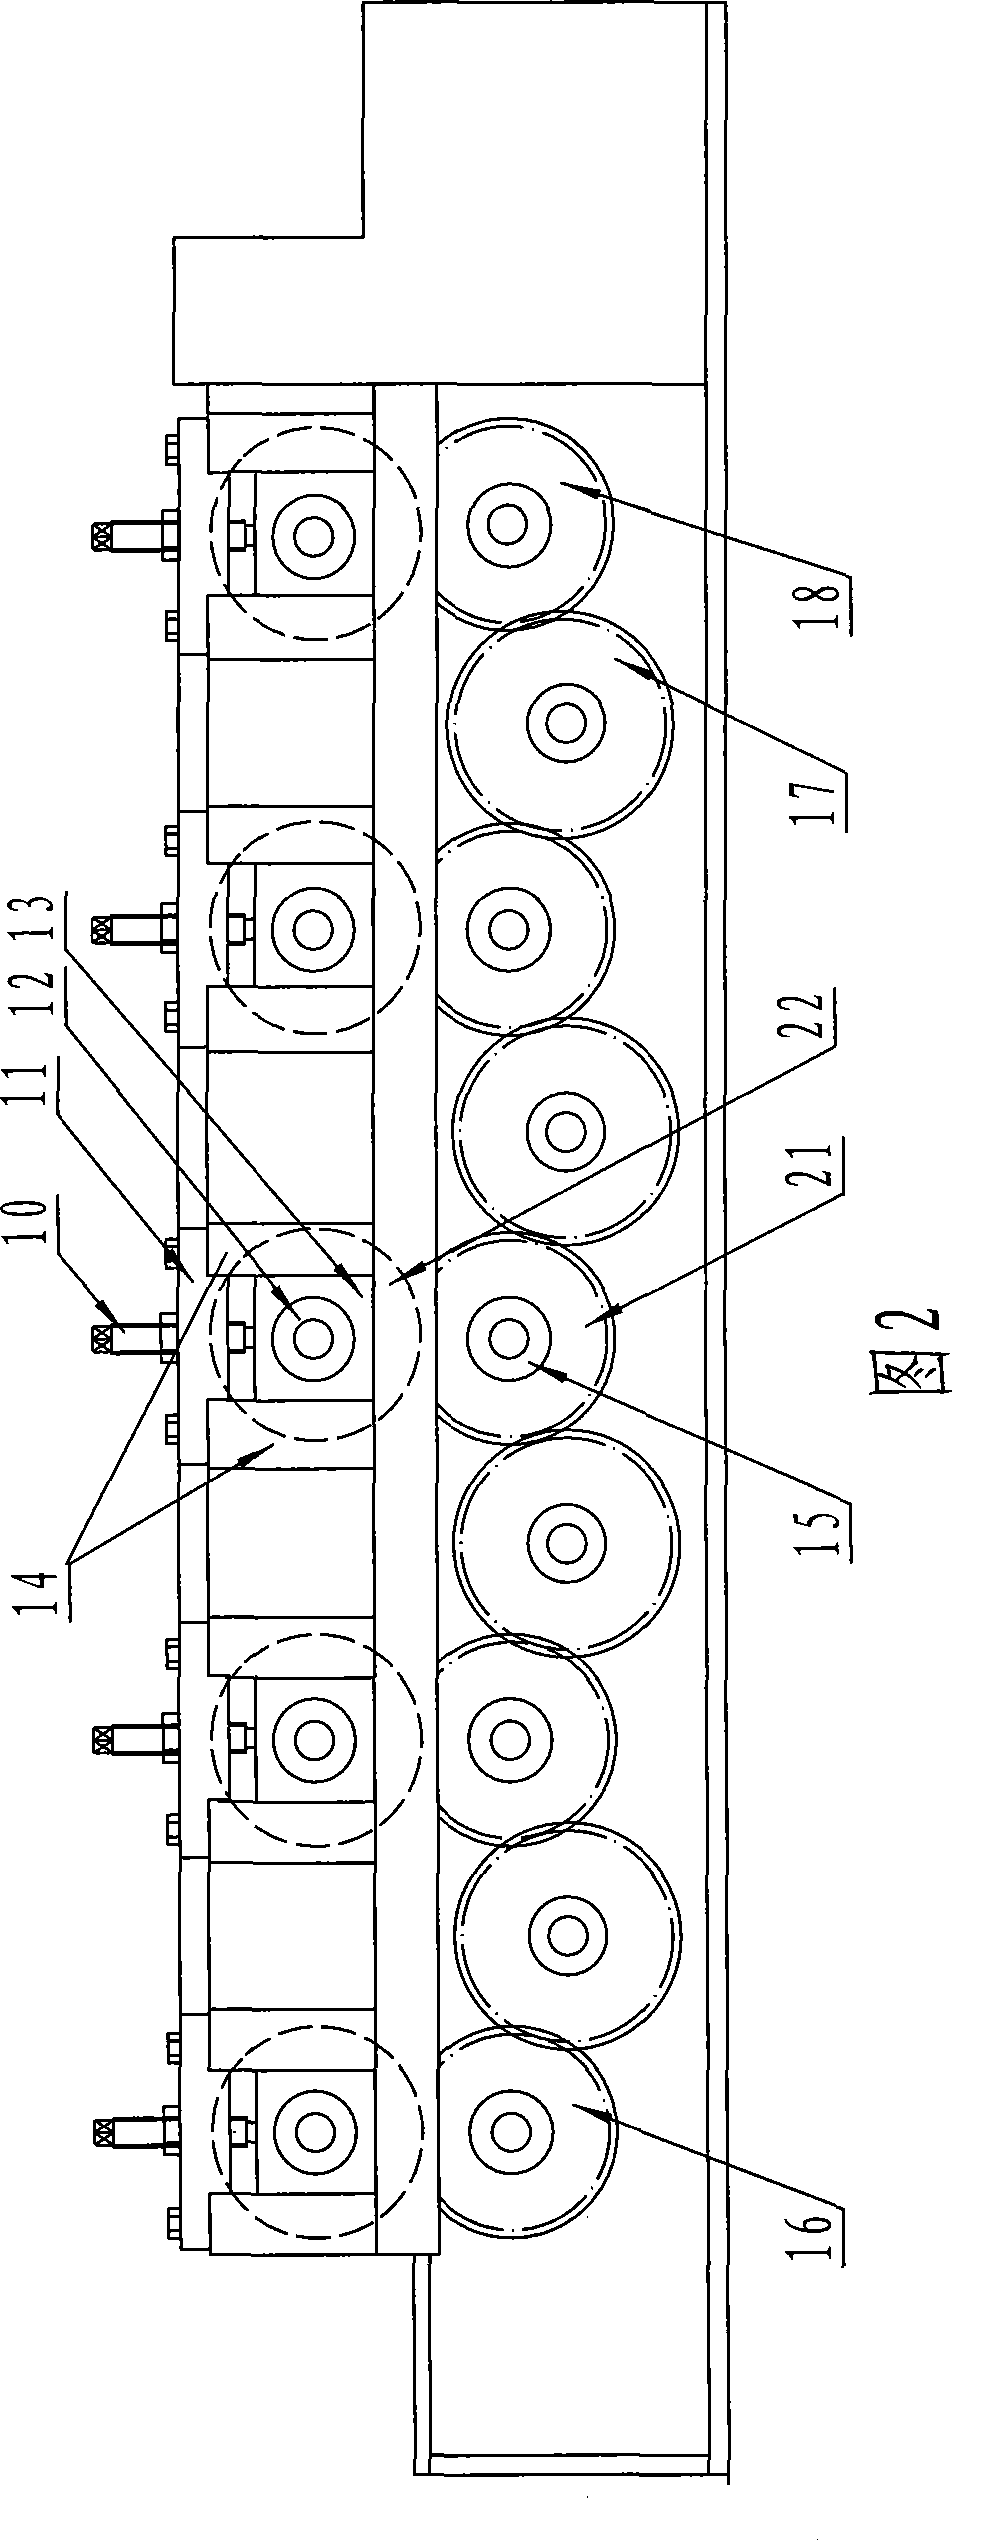 Semicanal formation rolling machine